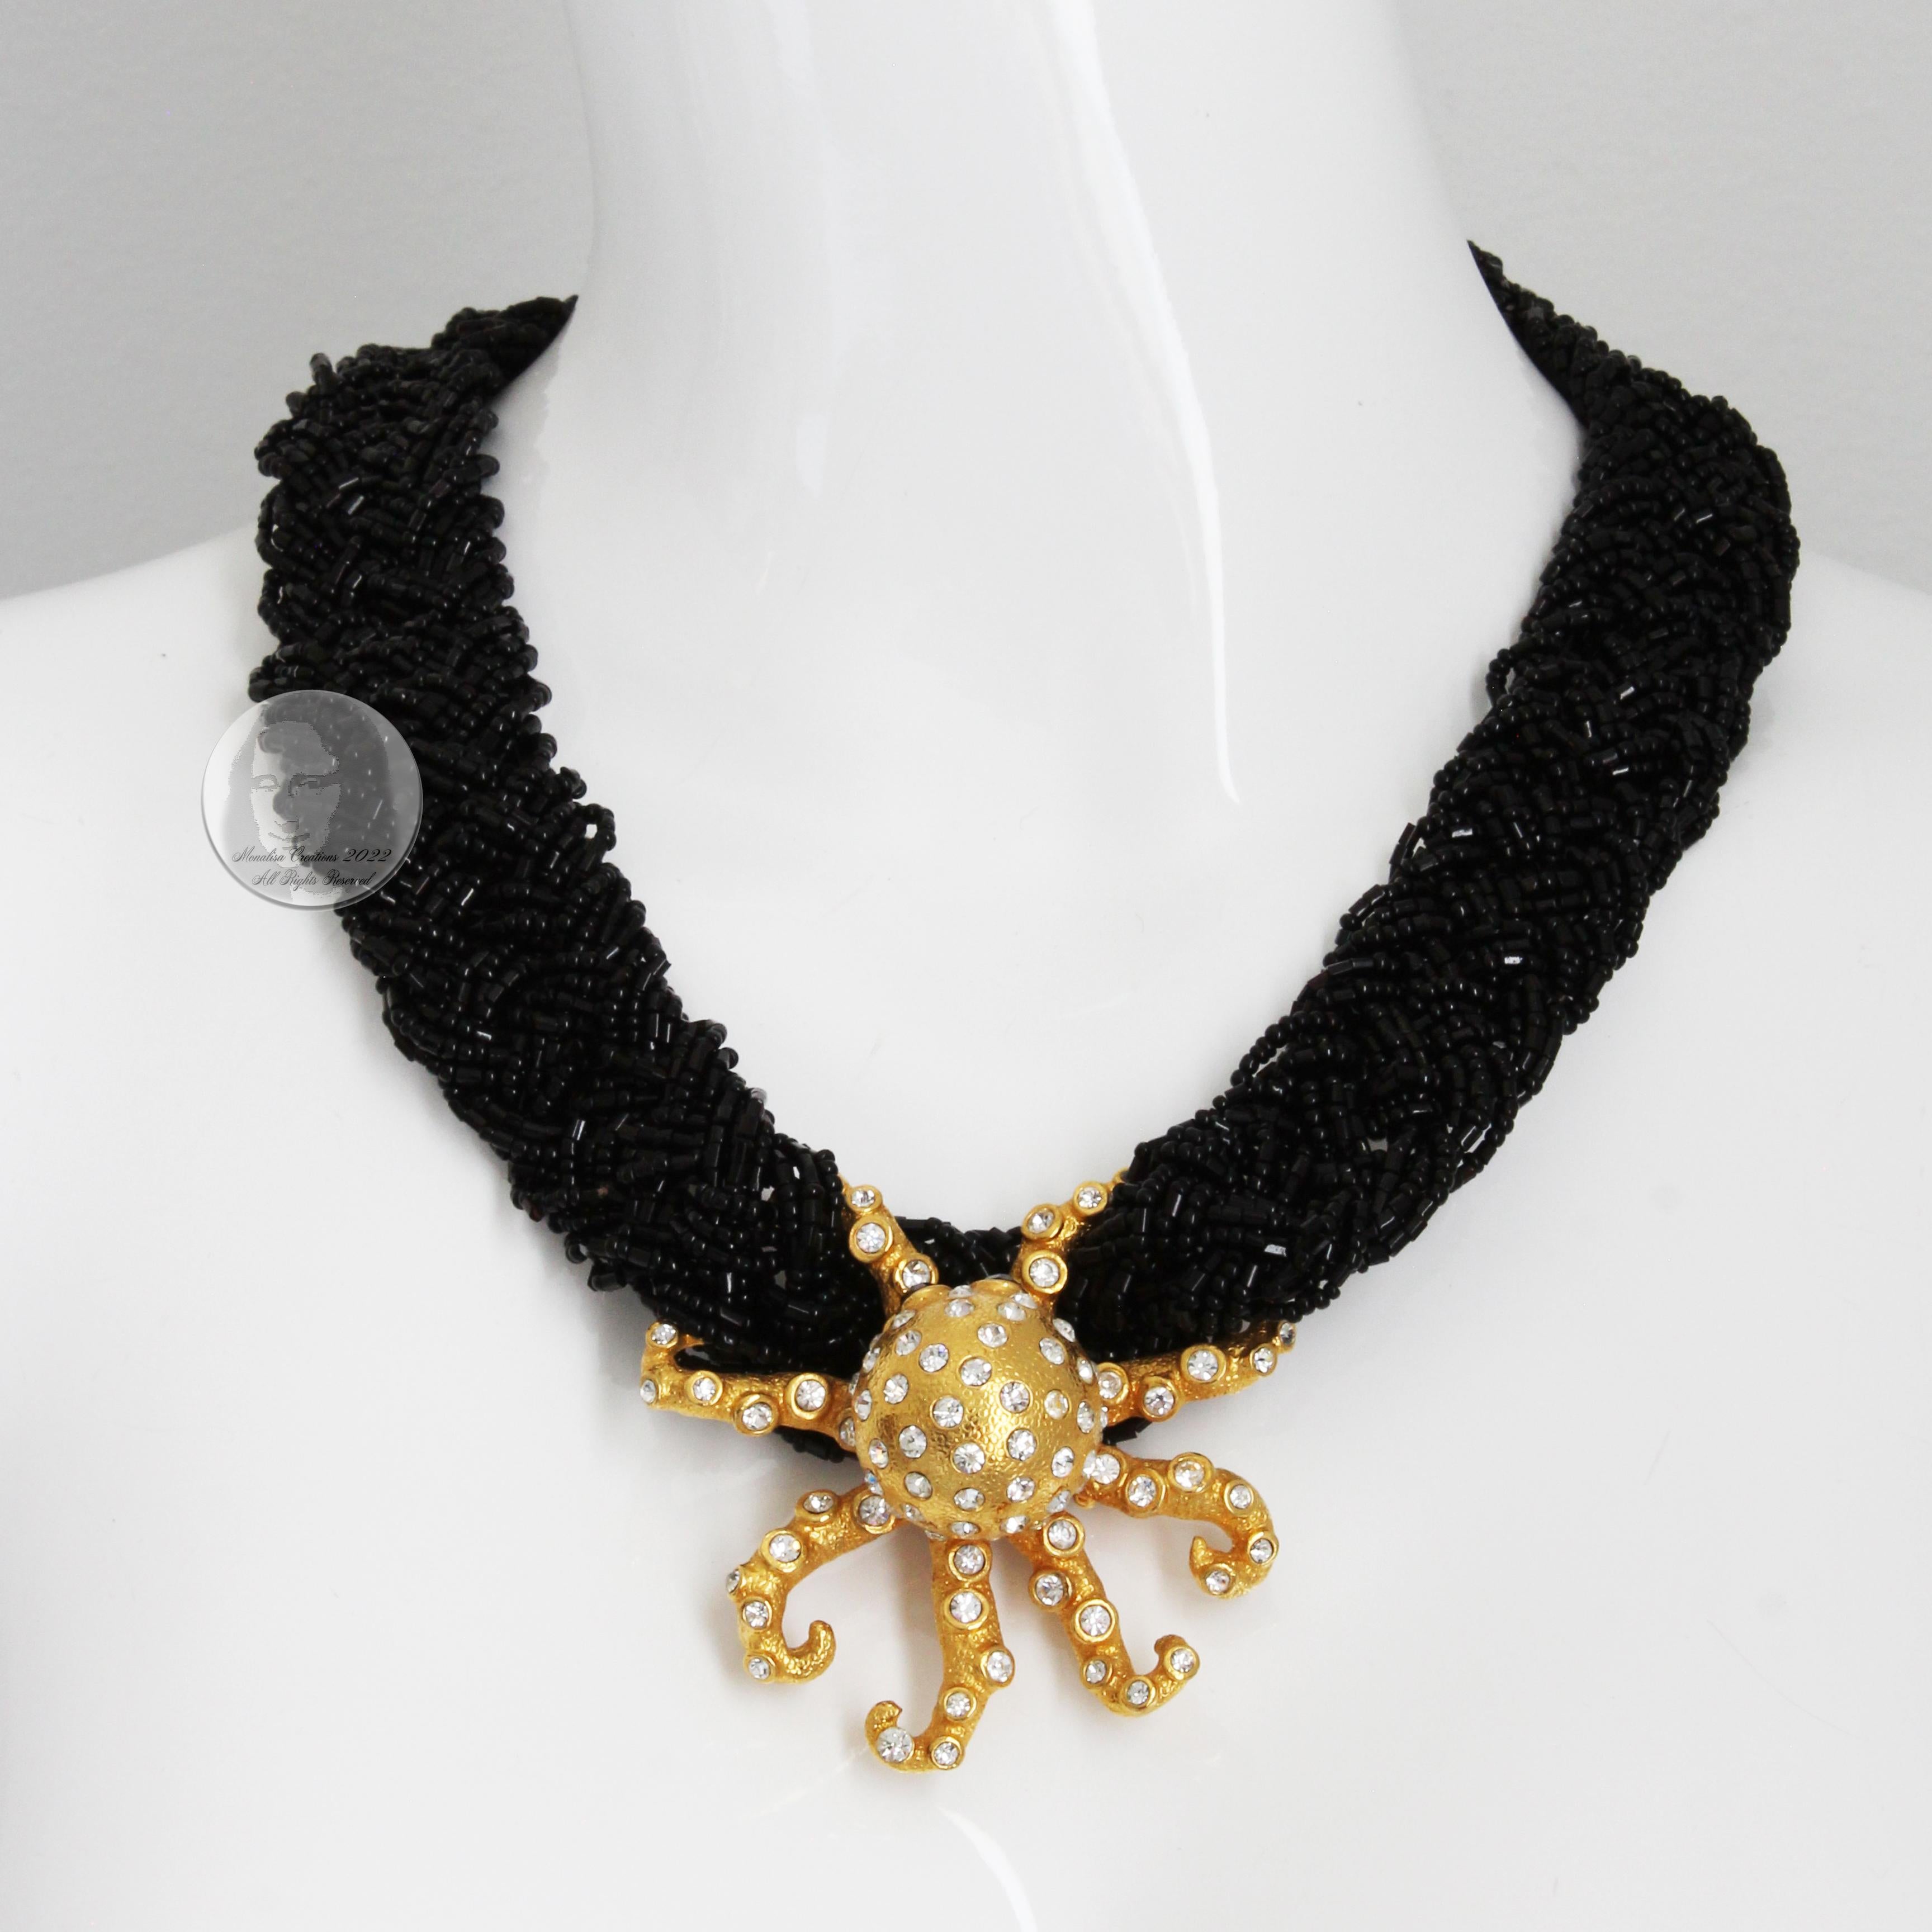 Contemporary Embellished Octopus Necklace by Stephanie Lake Design Rare Statement Piece For Sale